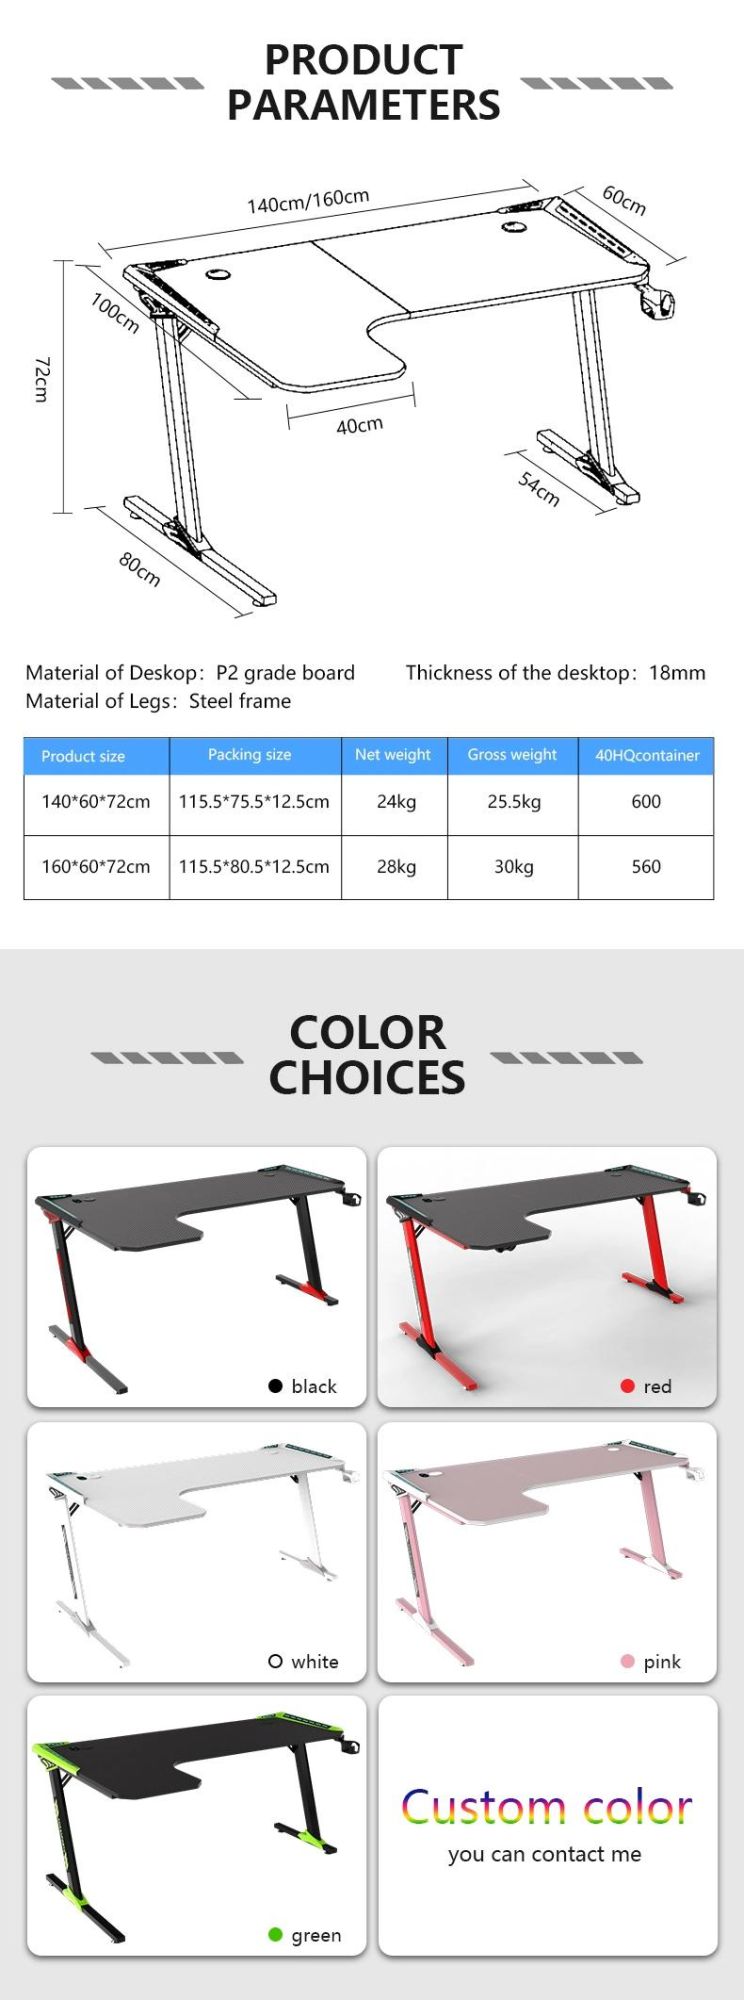 Aor Esports Customizes Furniture Bedroom Student Laptop RGB LED Light Dormitory Desktop Study Computer Table Gamer Competitive Chair Gaming Desk for Home Office